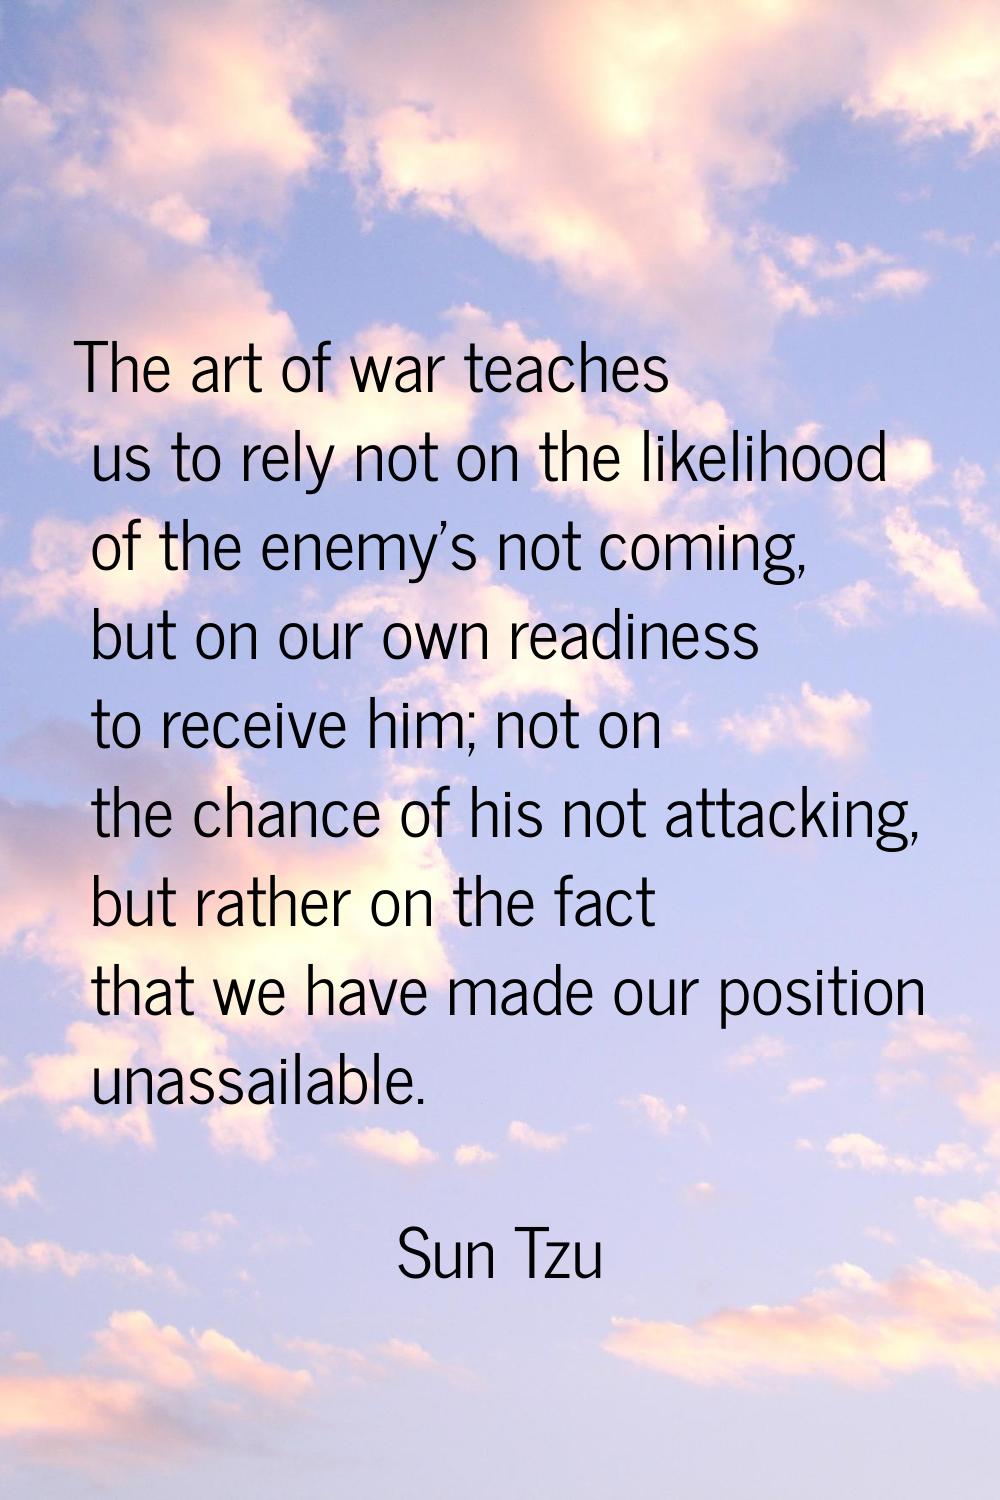 The art of war teaches us to rely not on the likelihood of the enemy's not coming, but on our own r